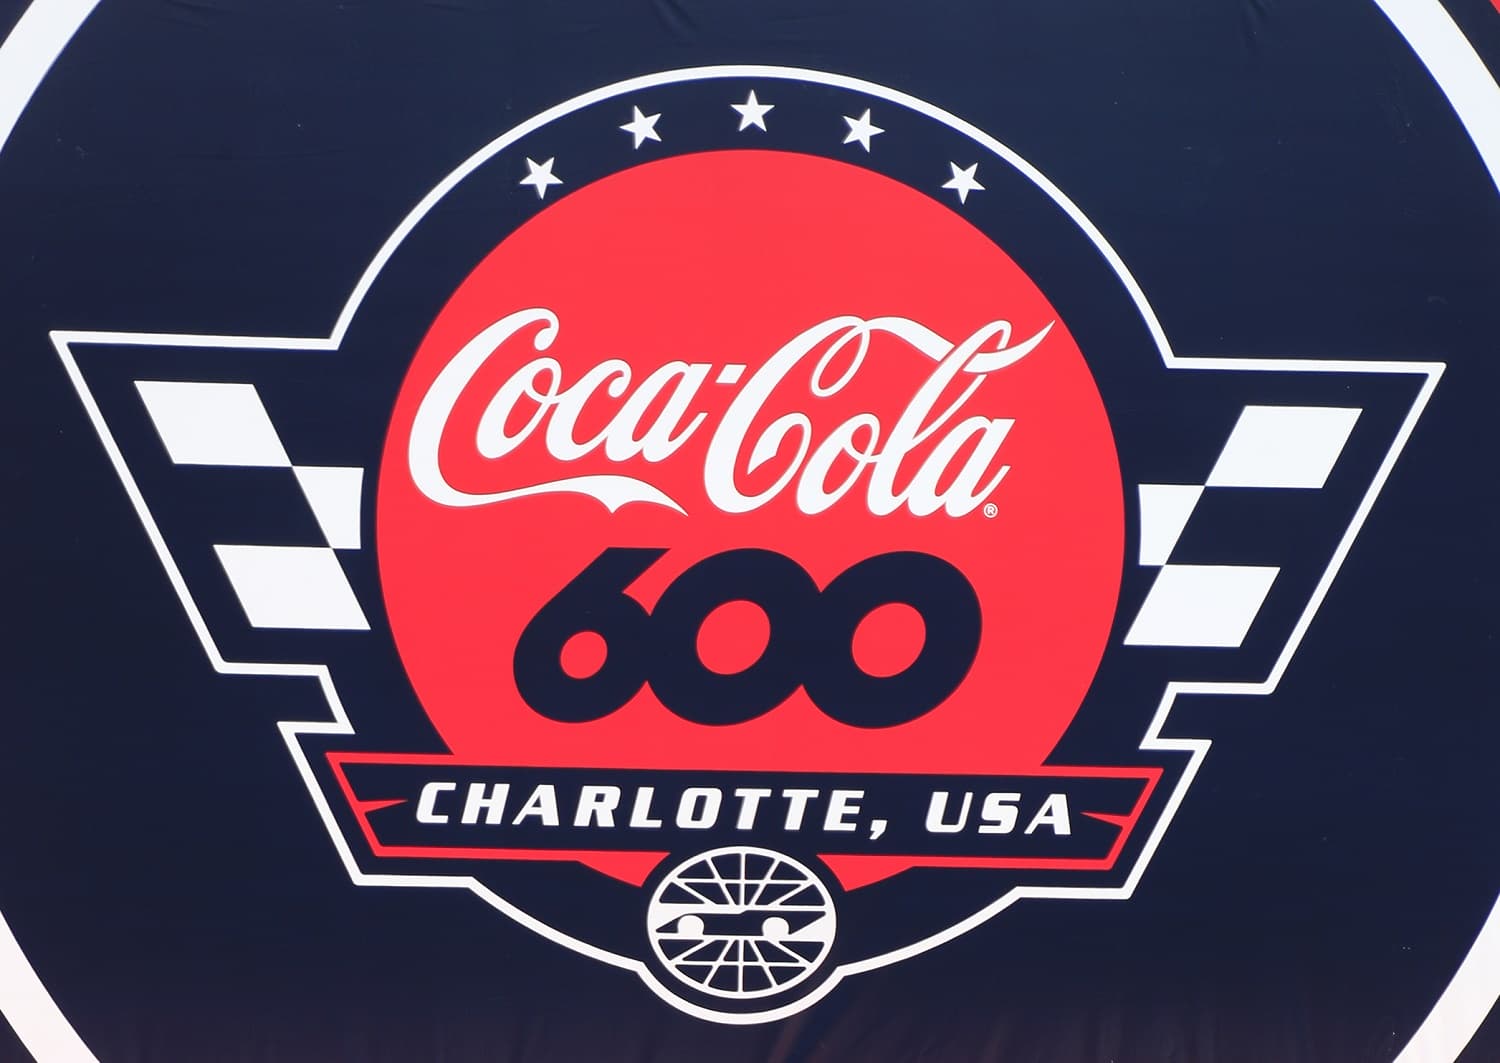 The logo for the NASCAR Cup Series Coca-Cola 600 on May 29, 2022, at Charlotte Motor Speedway.